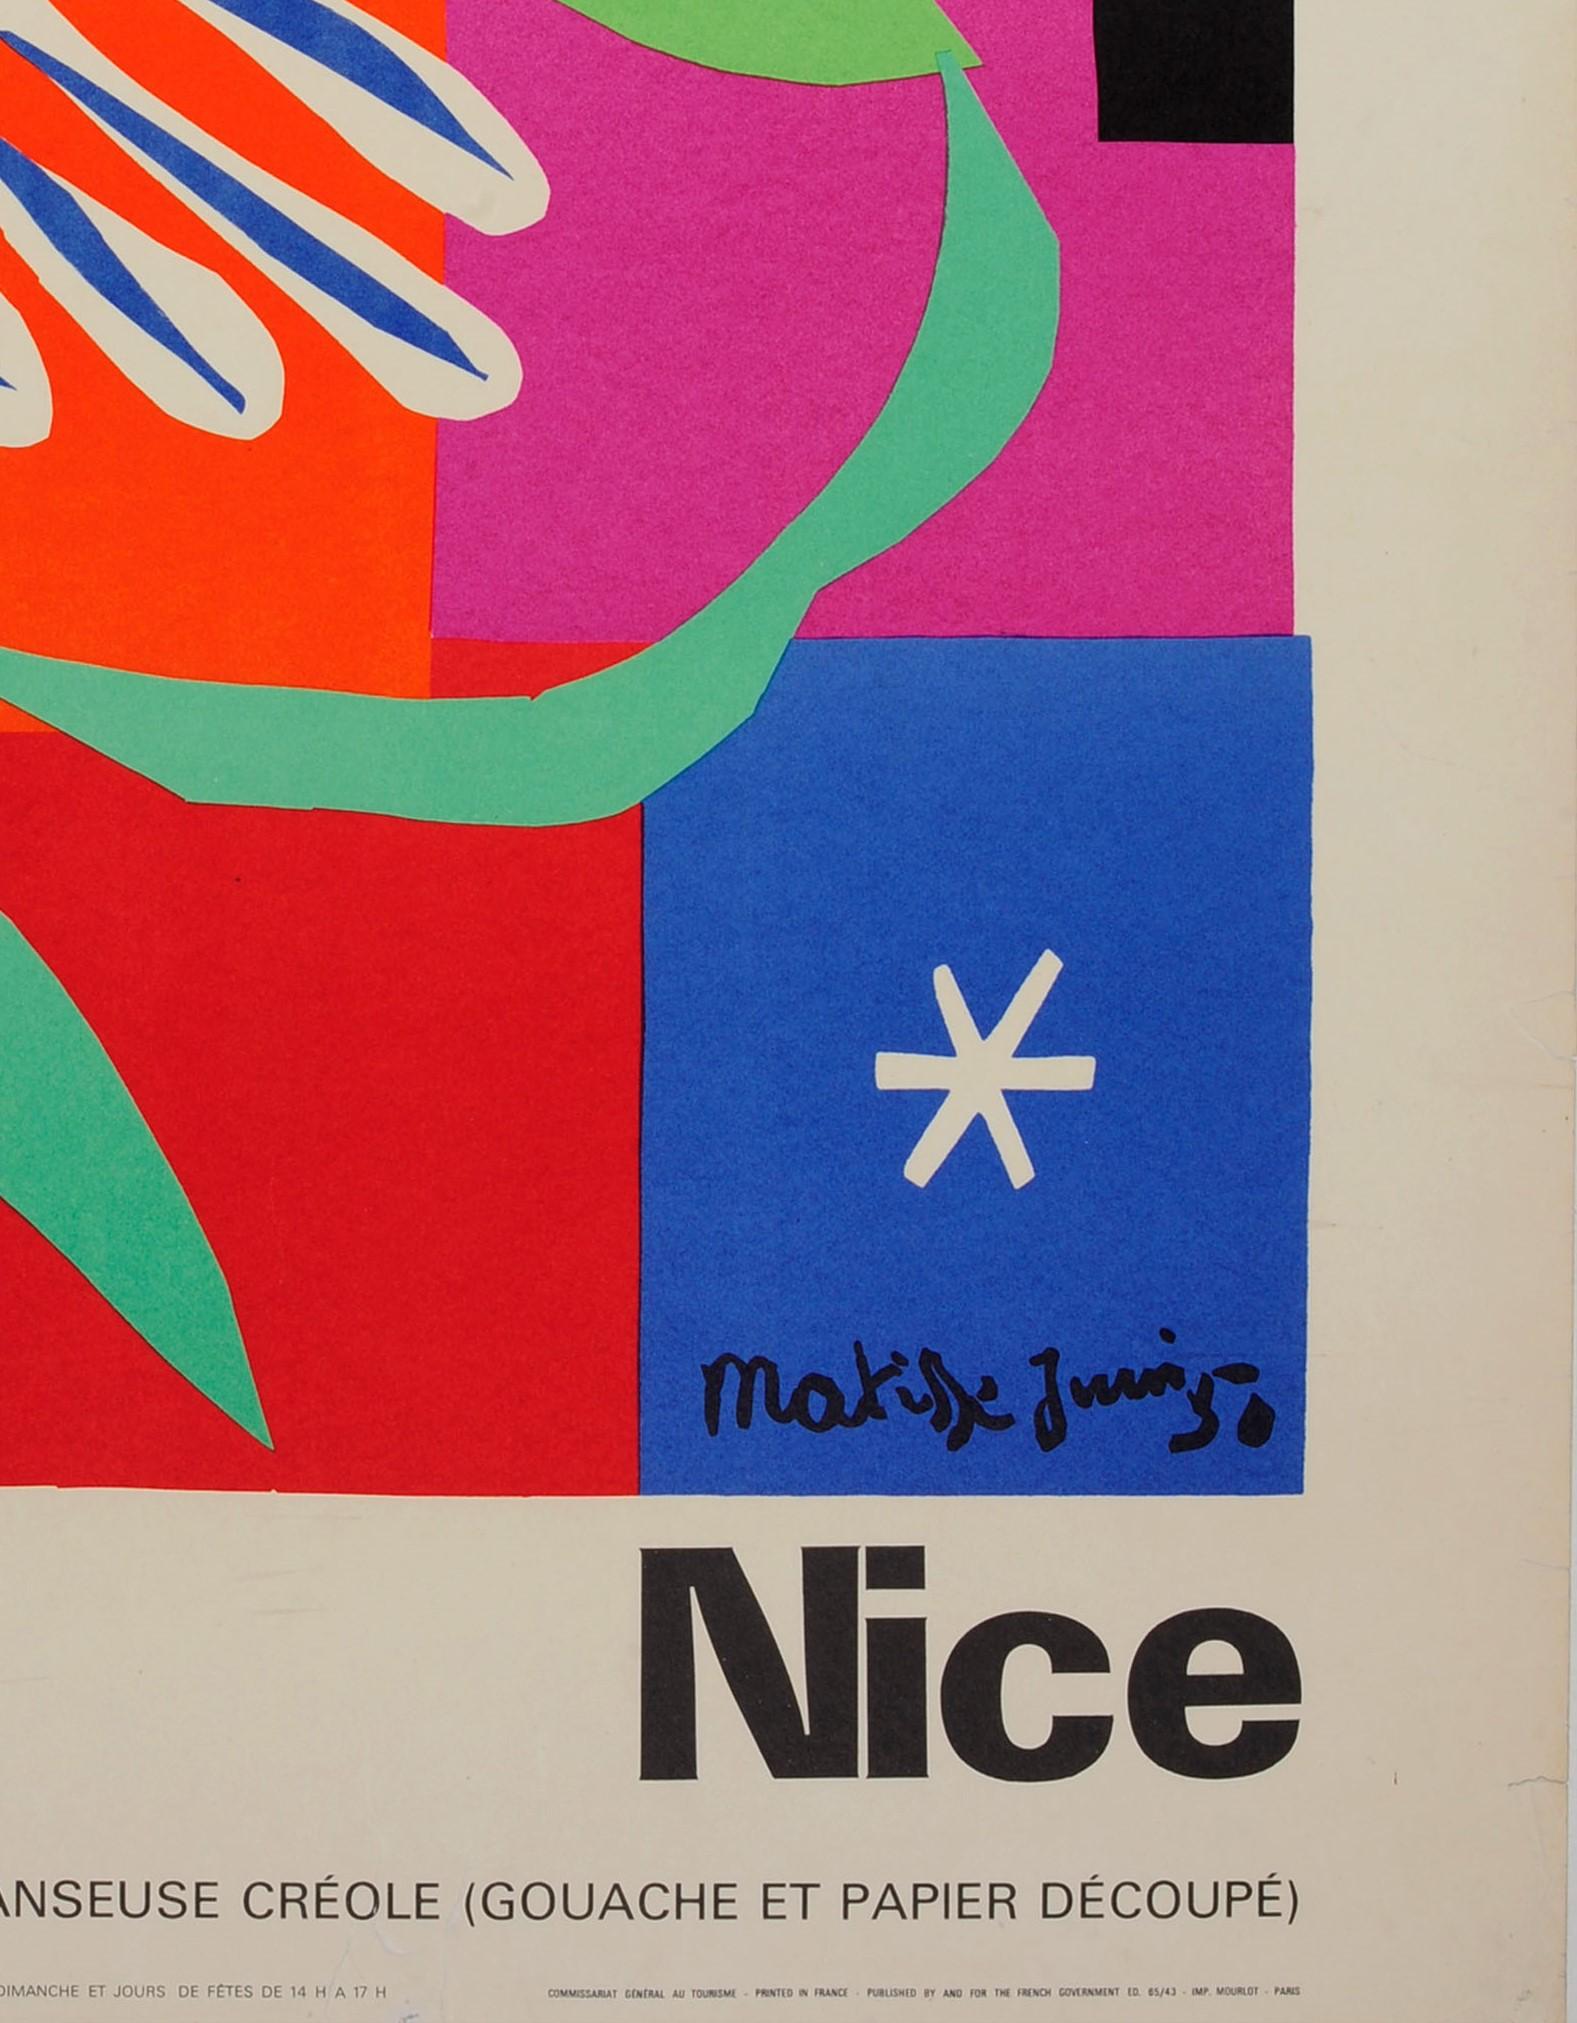 Original vintage travel poster advertising the city of Nice on the Cote d'Azur in France featuring a colourful design by the renowned French artist Henri Matisse (1869-1954) of his 1950 La Danseuse Creole gouache paint and cut-out paper artwork